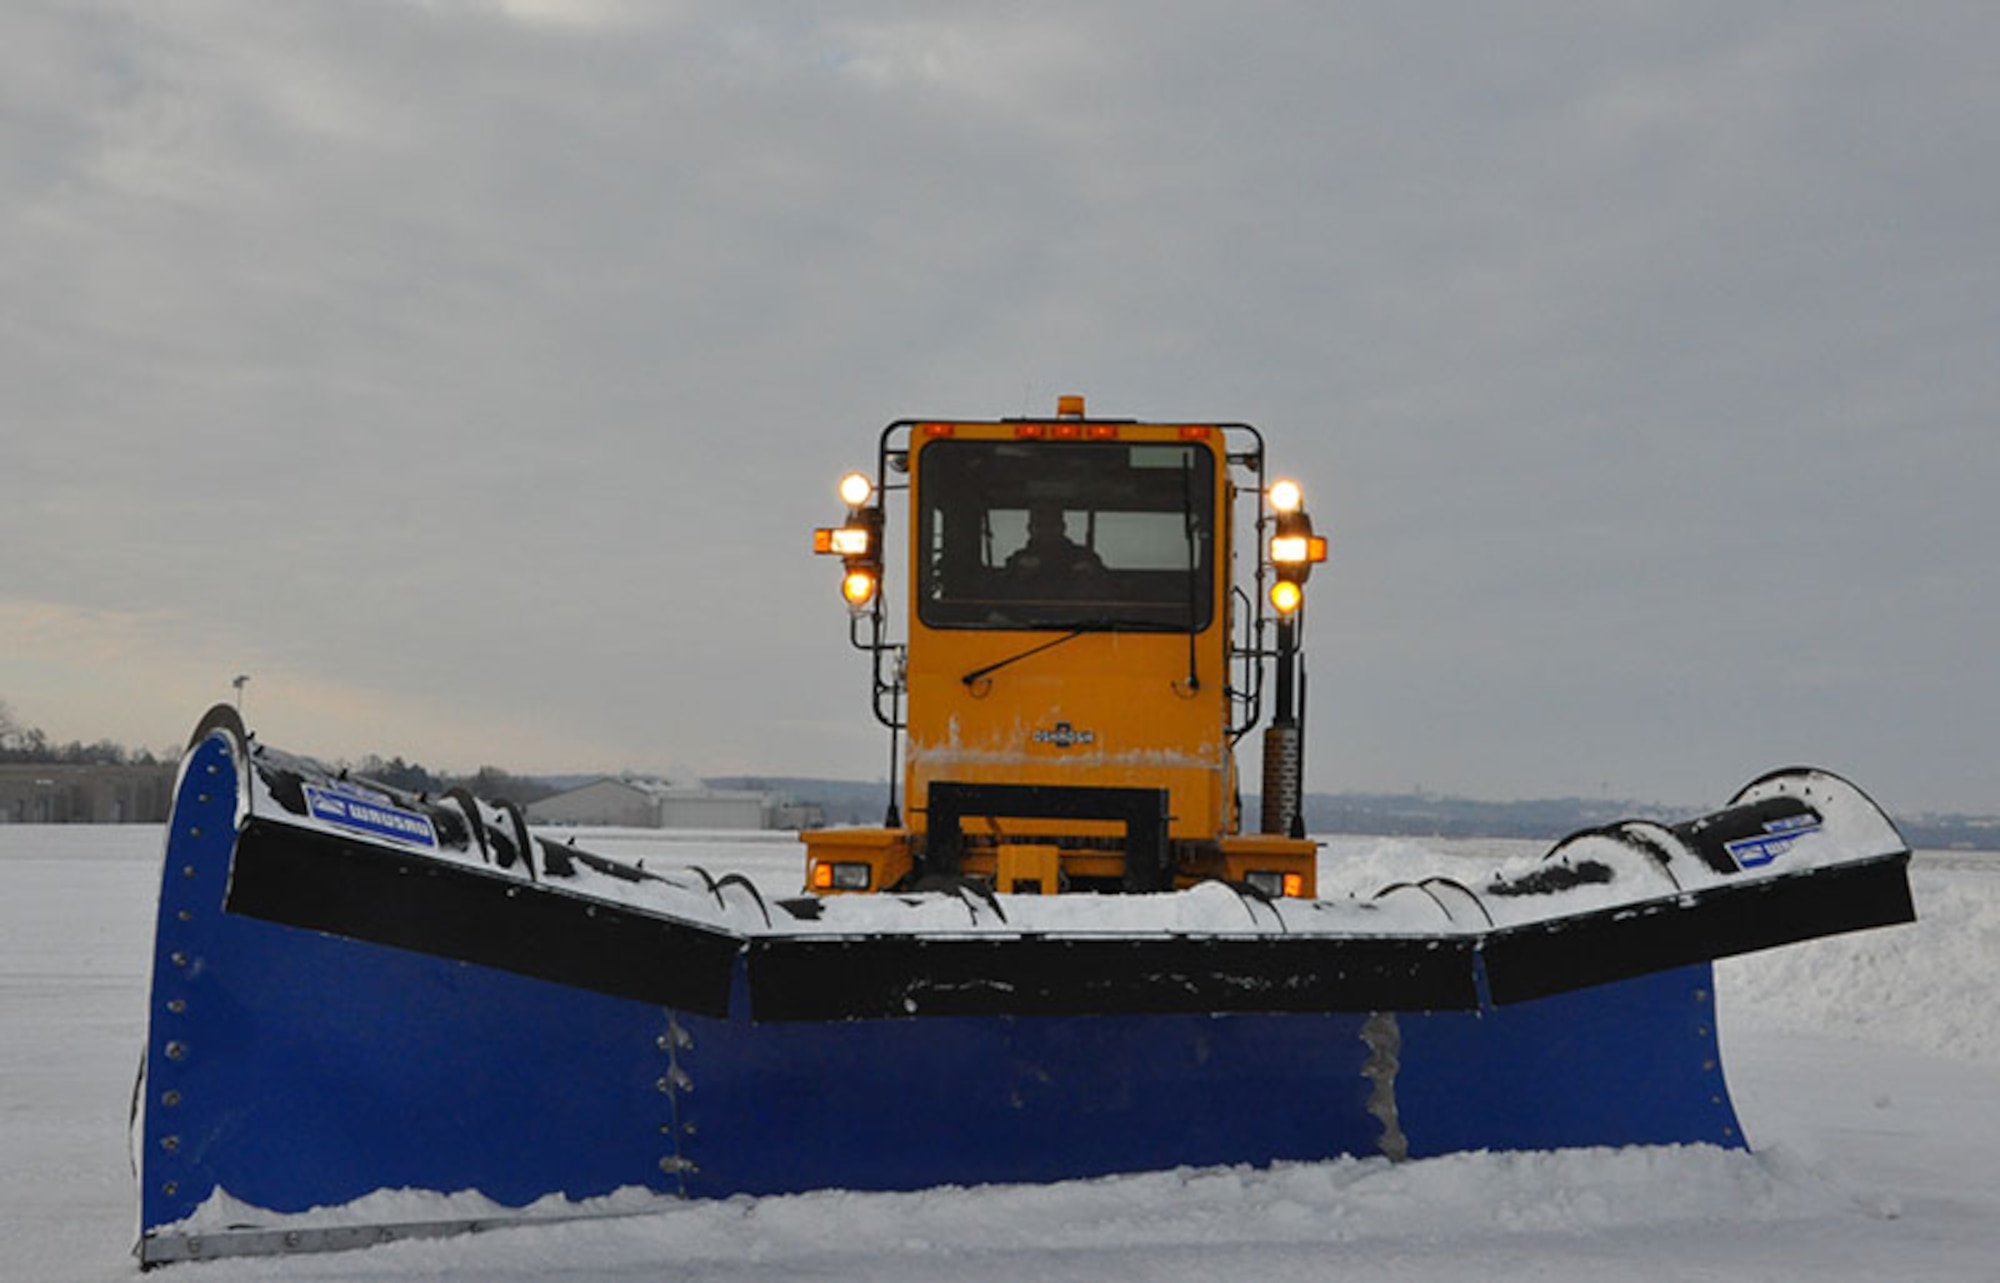 A snow plow clears the runway at Wright-Patterson AFB. Severe weather events like a snow storm can wreak havoc on runways and streets on the installation, causing reporting delays or base closures. (U.S. Air Force photo)